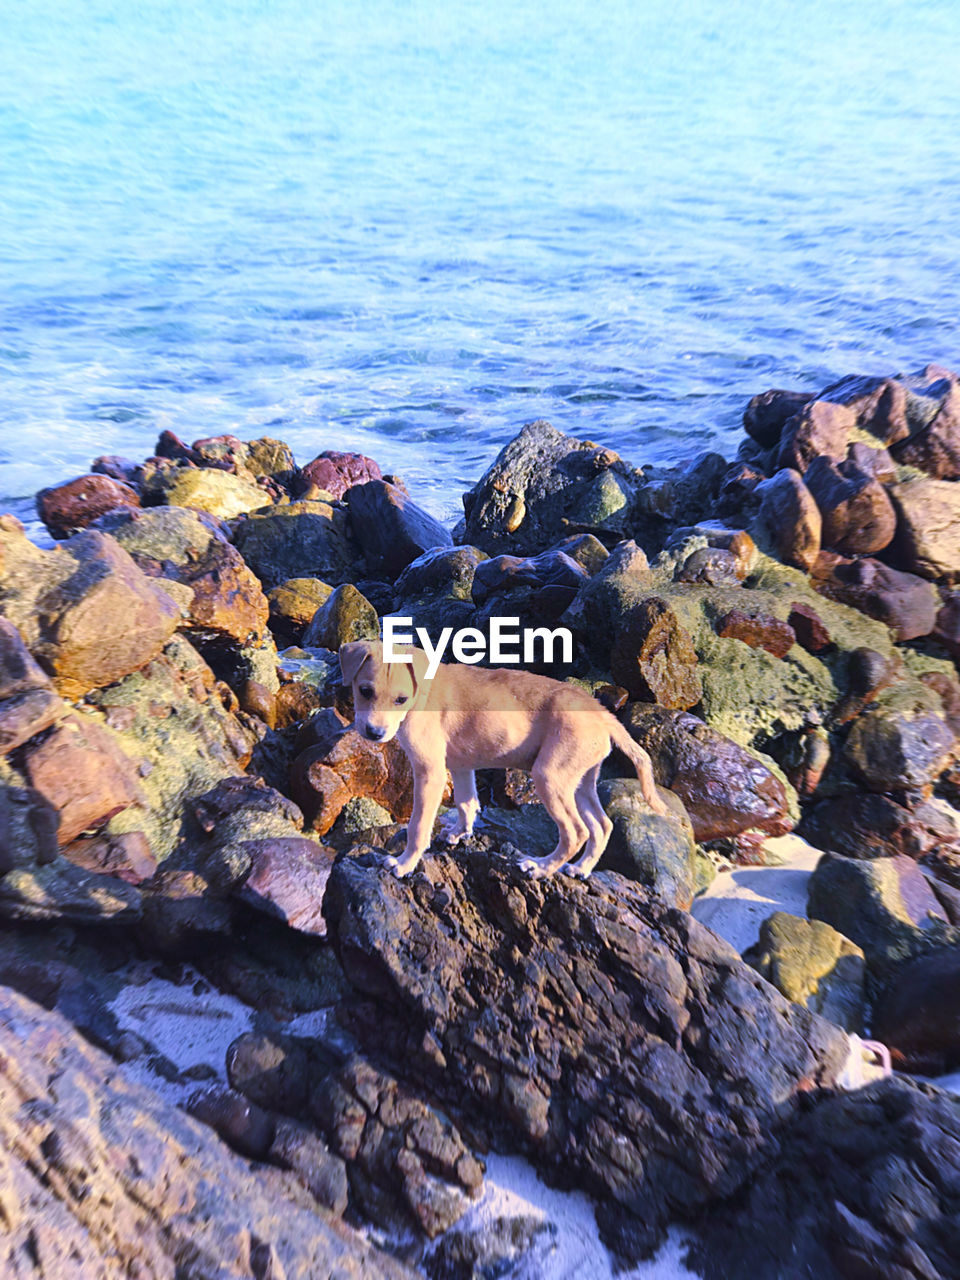 VIEW OF DOG ON ROCK AT BEACH